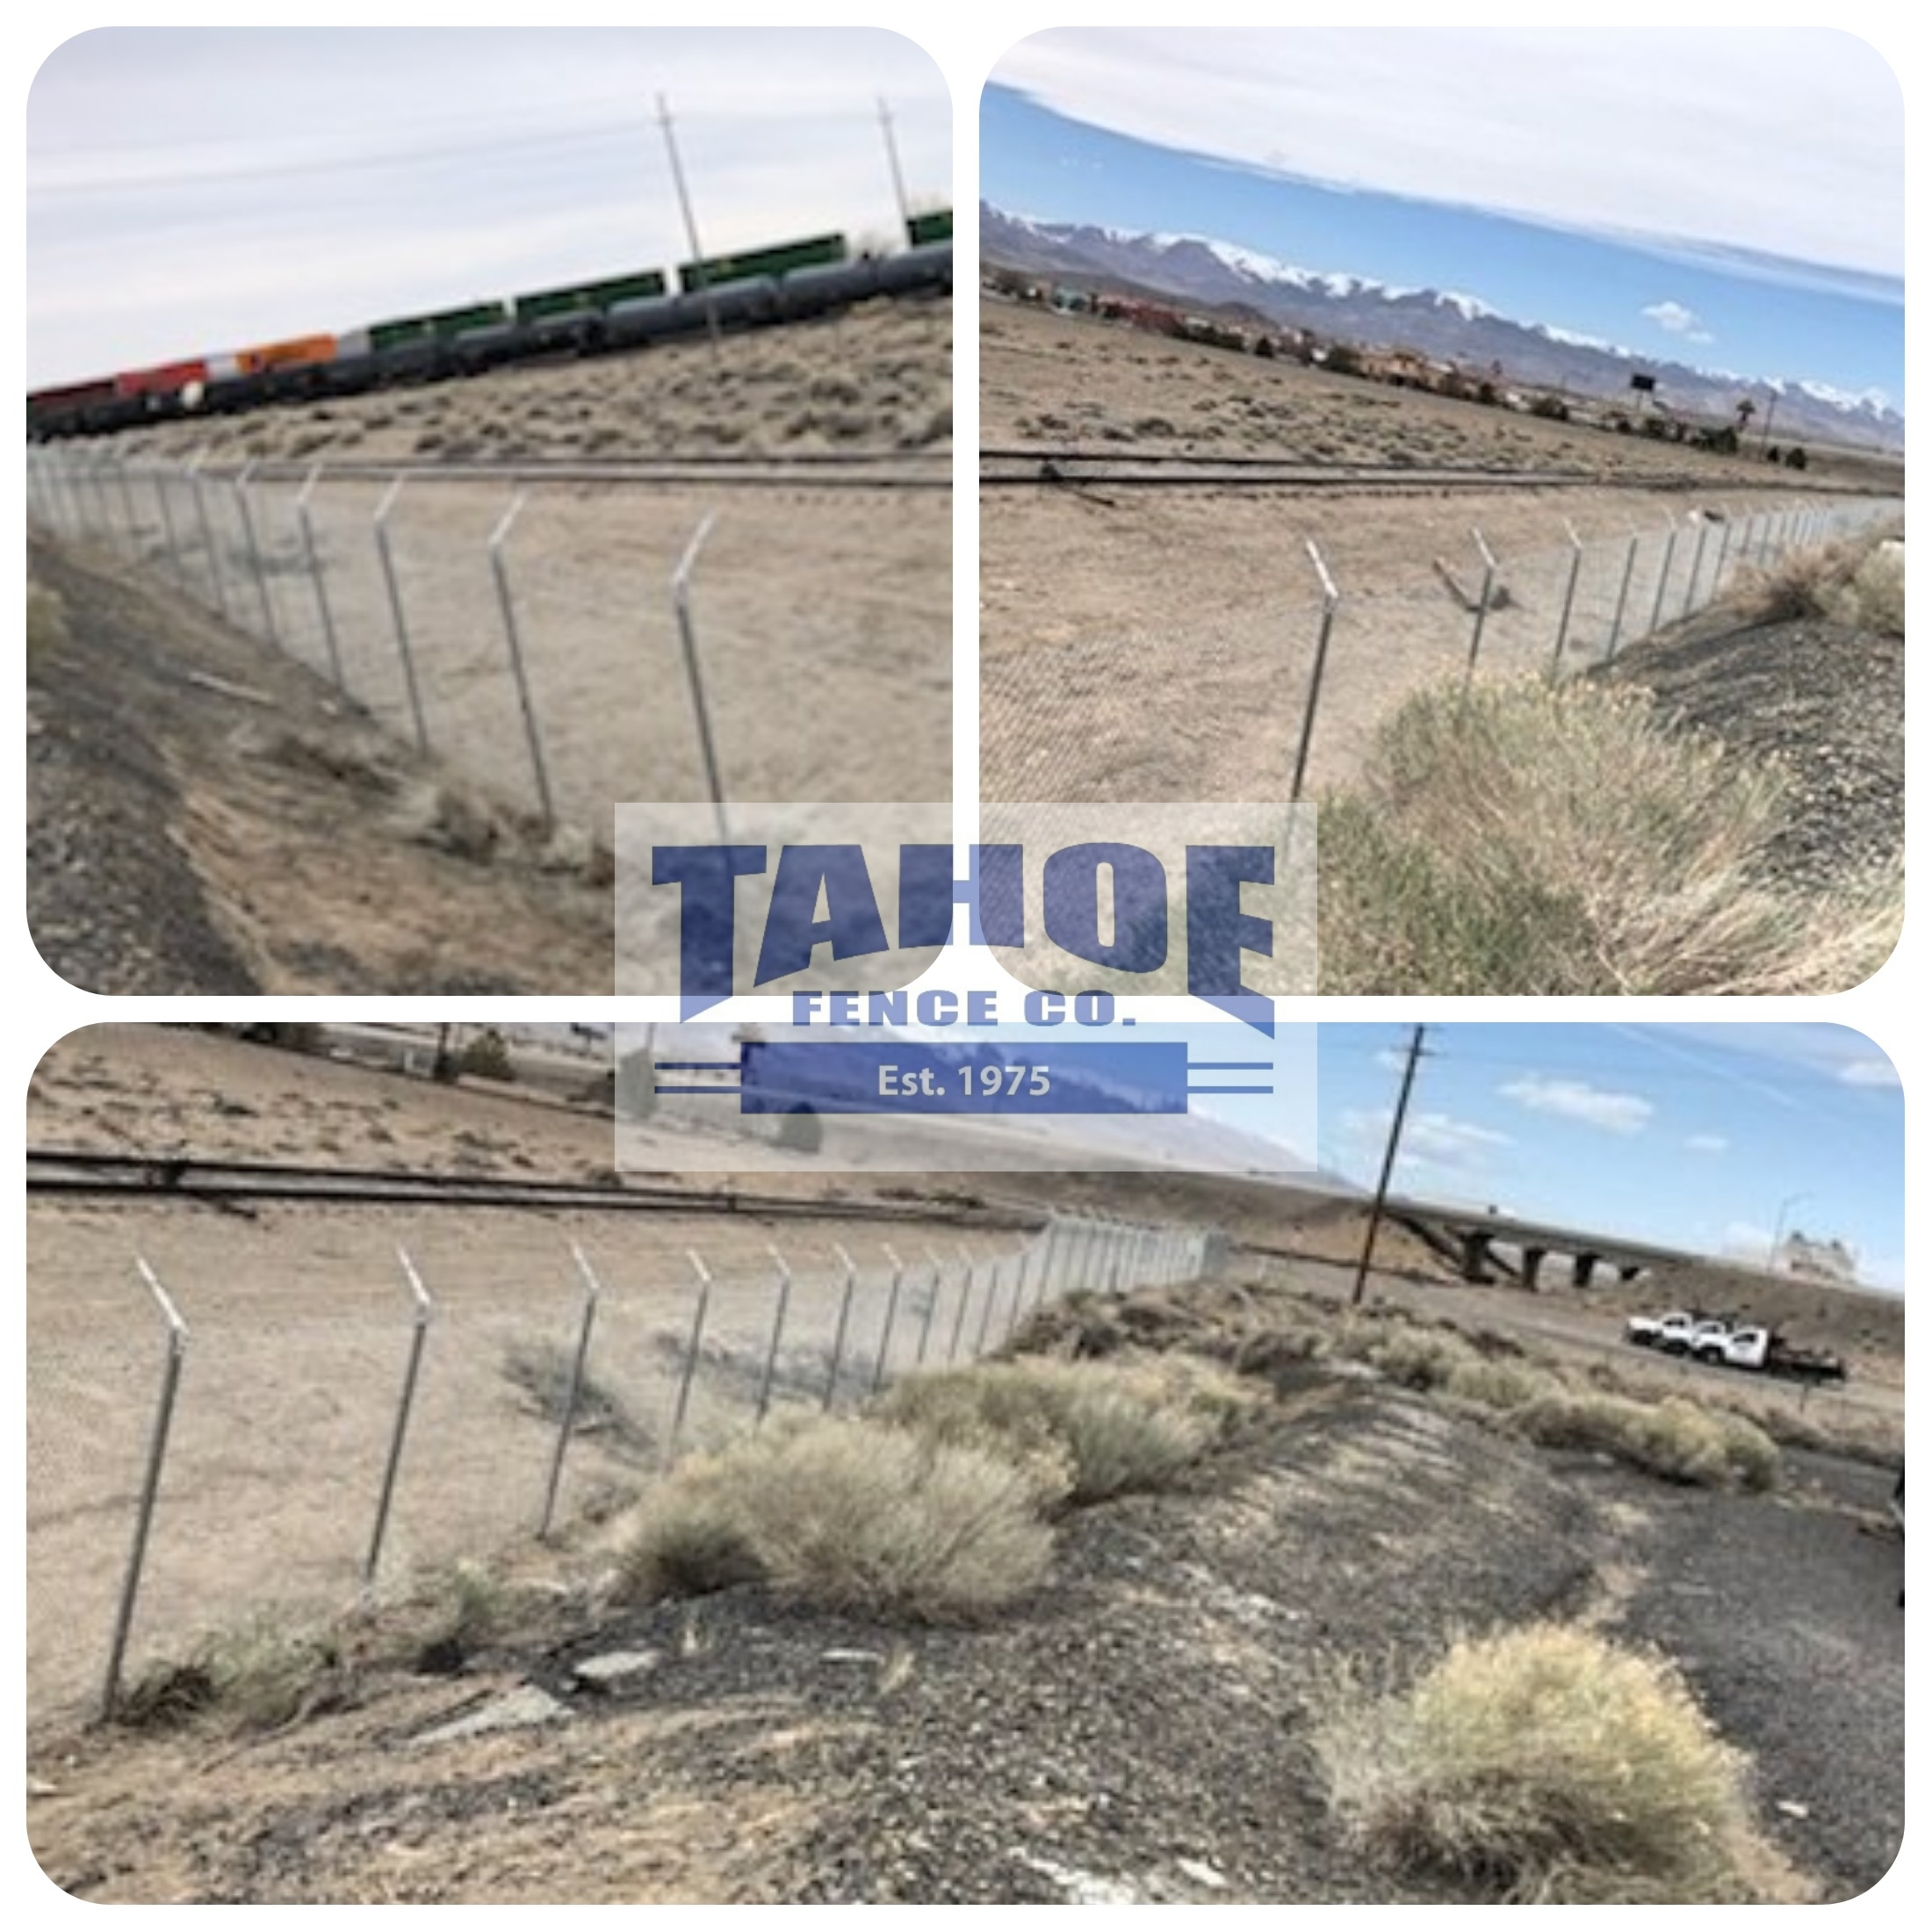 Keep It Rolling

Like the song "The Train Kept A-Rollin," Tahoe's crews are busy busting out the fence installs this season.

Just finished a big job out in Fernley with both new, chain link fence installation and some repair/refurbishment of existing fences and gates.

The project was partially located near railroad tracks.  Not only was PPE required for the railroad, but the fence lines had to be a certain minimum distance from the tracks to maintain the required easement. And under the watchful eye of a railroad safety officer/inspector.

When you hear those special service announcements about staying away from train tracts, listen! Isn't anything to mess with. 

Fortunately, our crews didn't have any "Stand By Me" incidents.

Pictured: Tahoe keeping it rolling with a chain link fence and barbed wire with a train, tracts, and railroad trestle in the background in Fernley (Lyon County.)